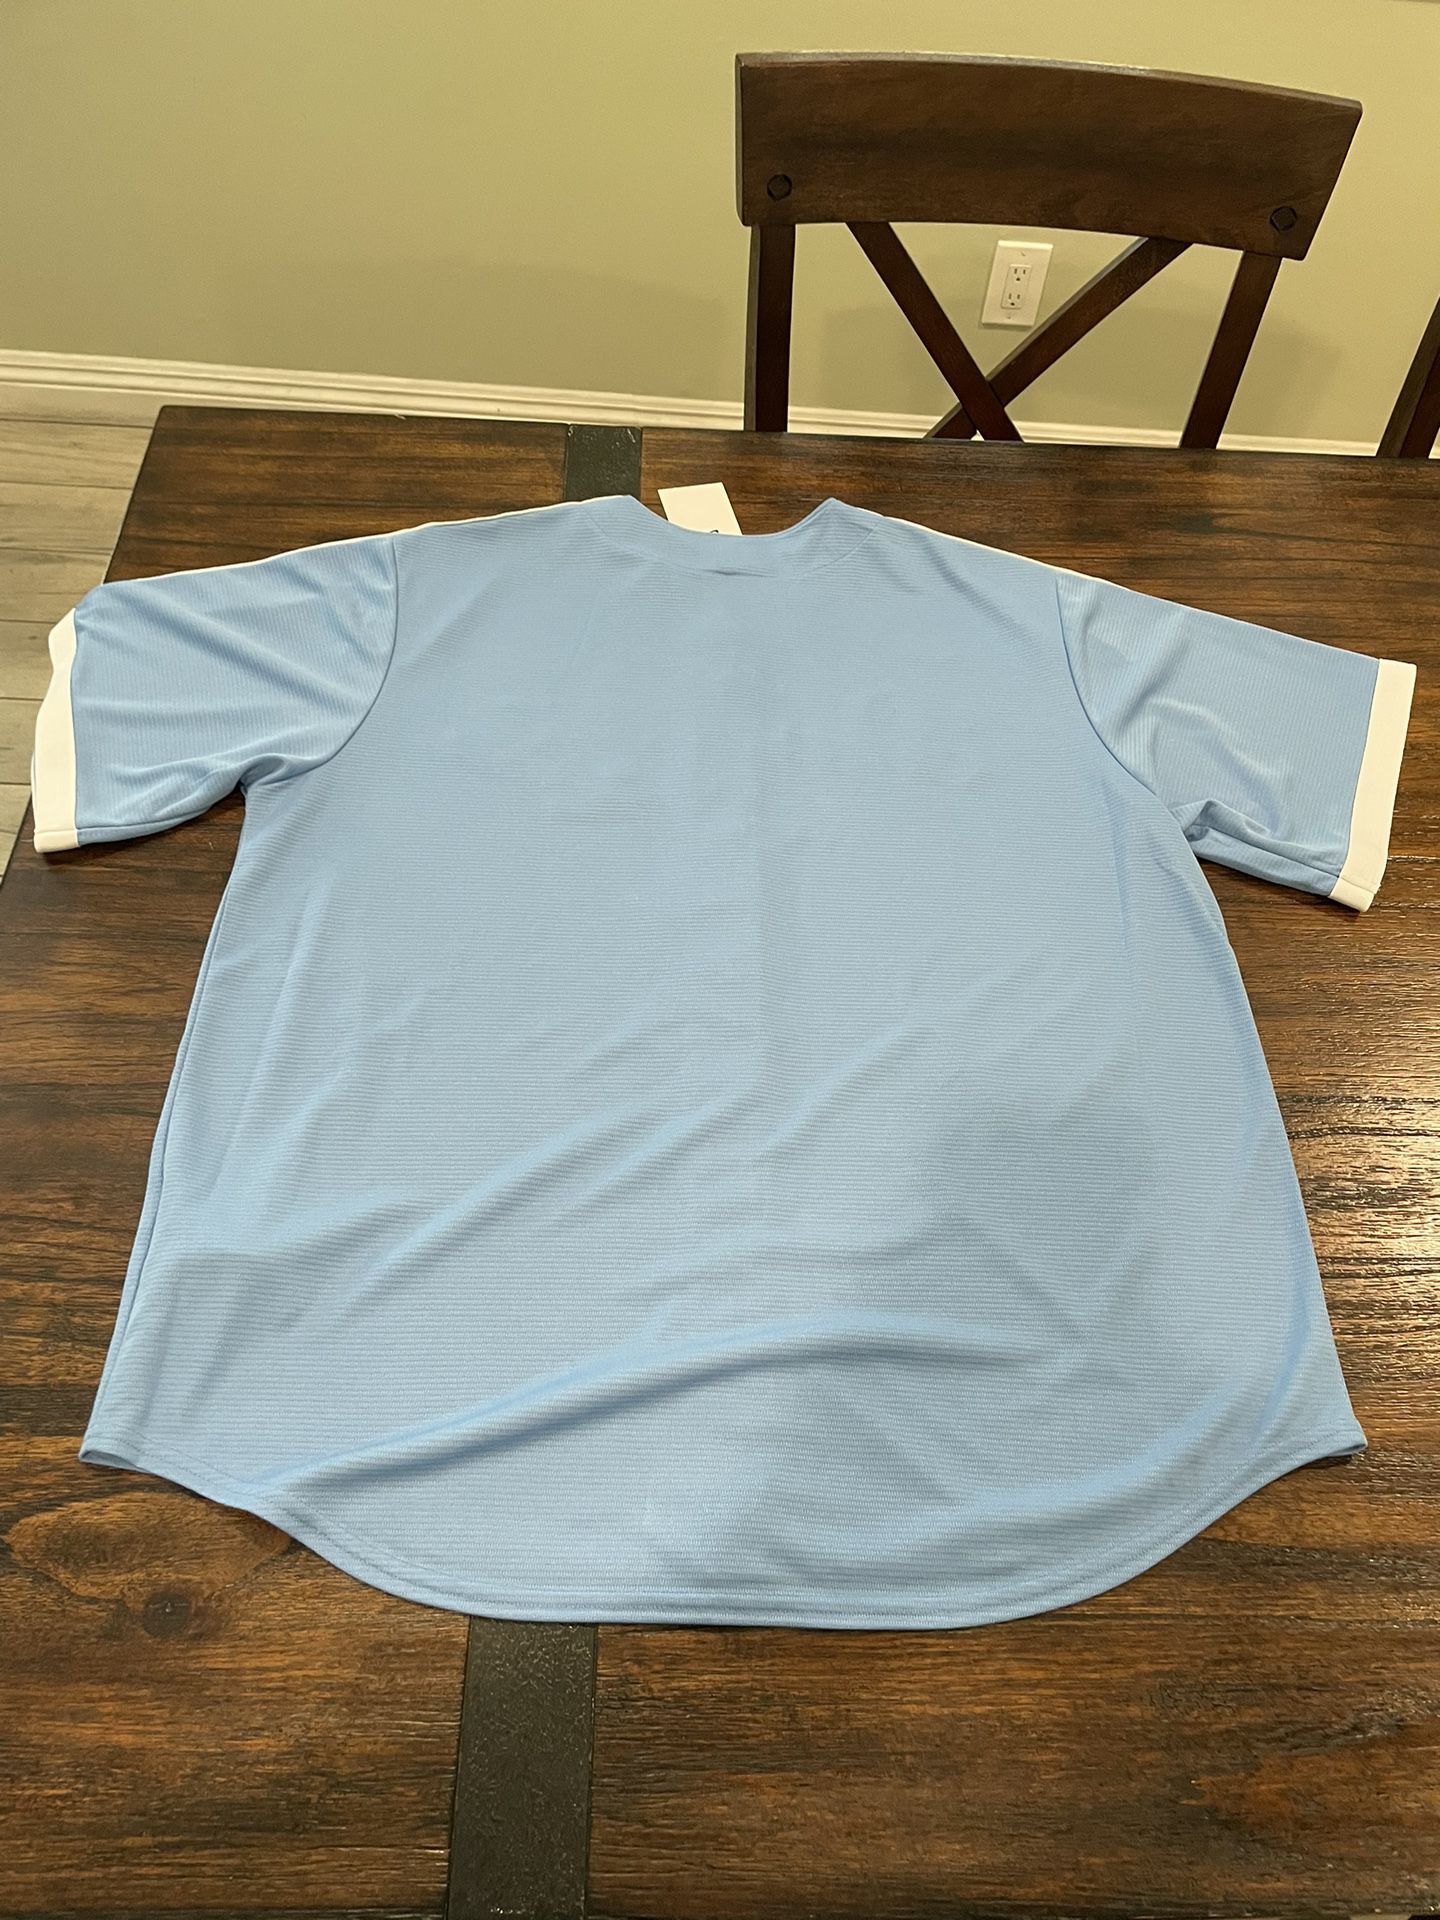 New York Mets Womens MLB Black / Blue / Orange Baseball Jersey (XL)  MULTIPLE SIZES ! for Sale in Los Angeles, CA - OfferUp